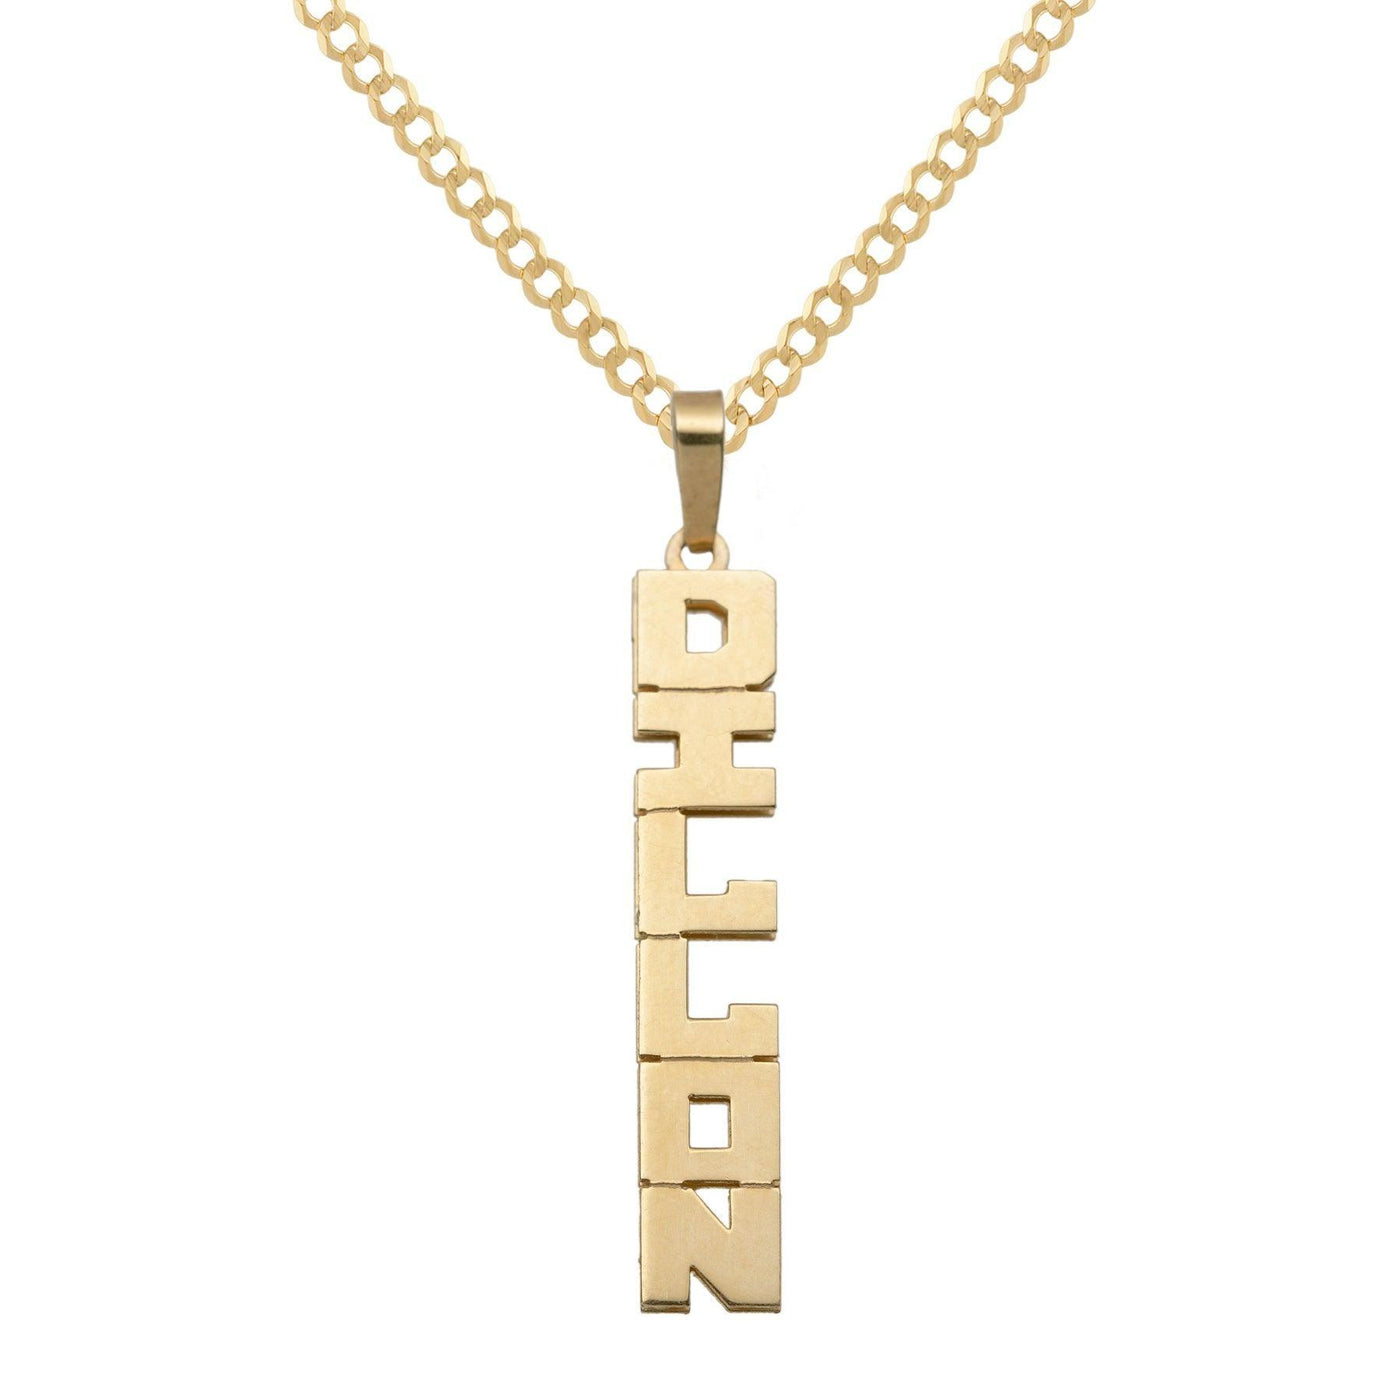 Ladies Vertical Script Name Plate Necklace 14K Gold - Style 95 - bayamjewelry